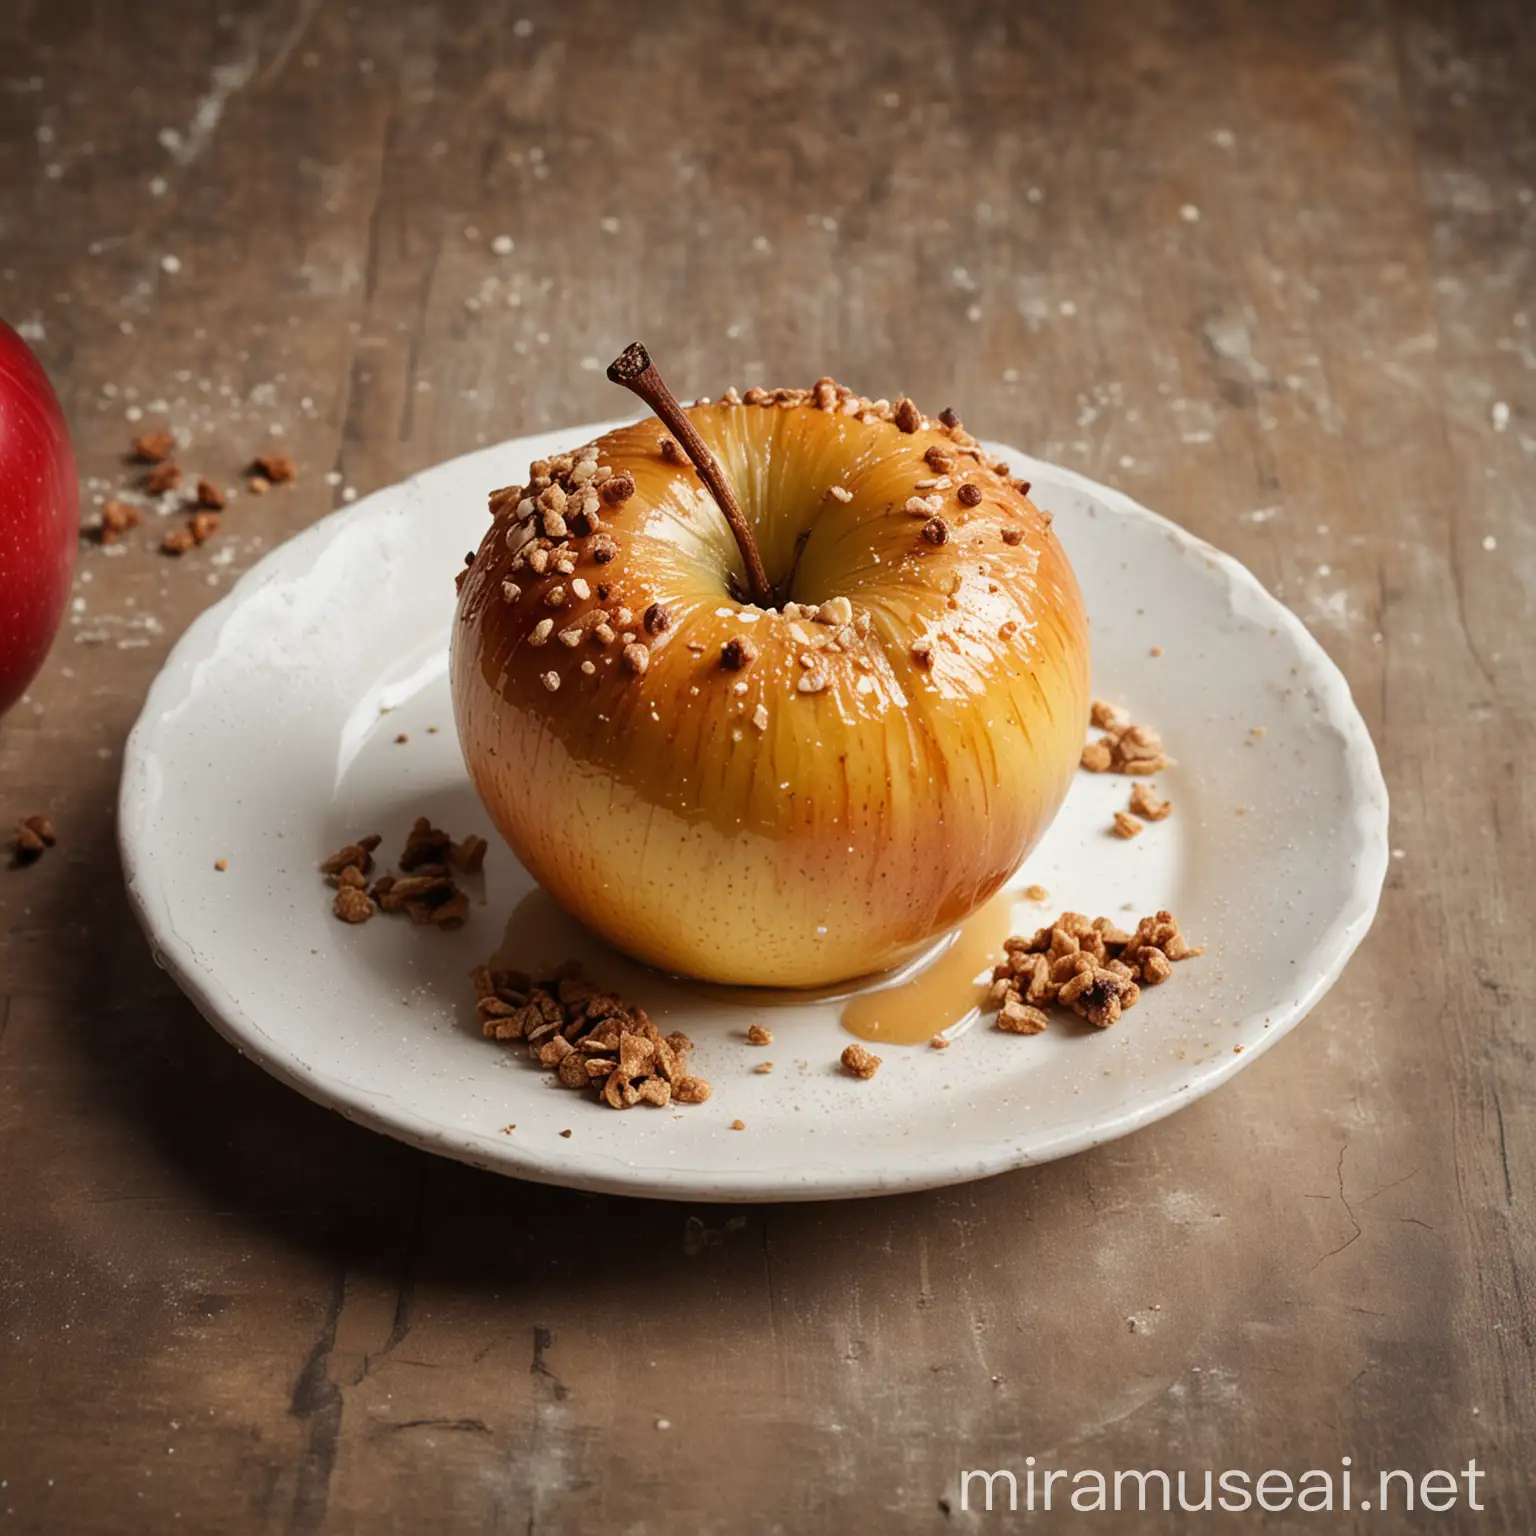 Delicious Baked Apples Tempting Dessert Recipe with Cinnamon and Nutmeg